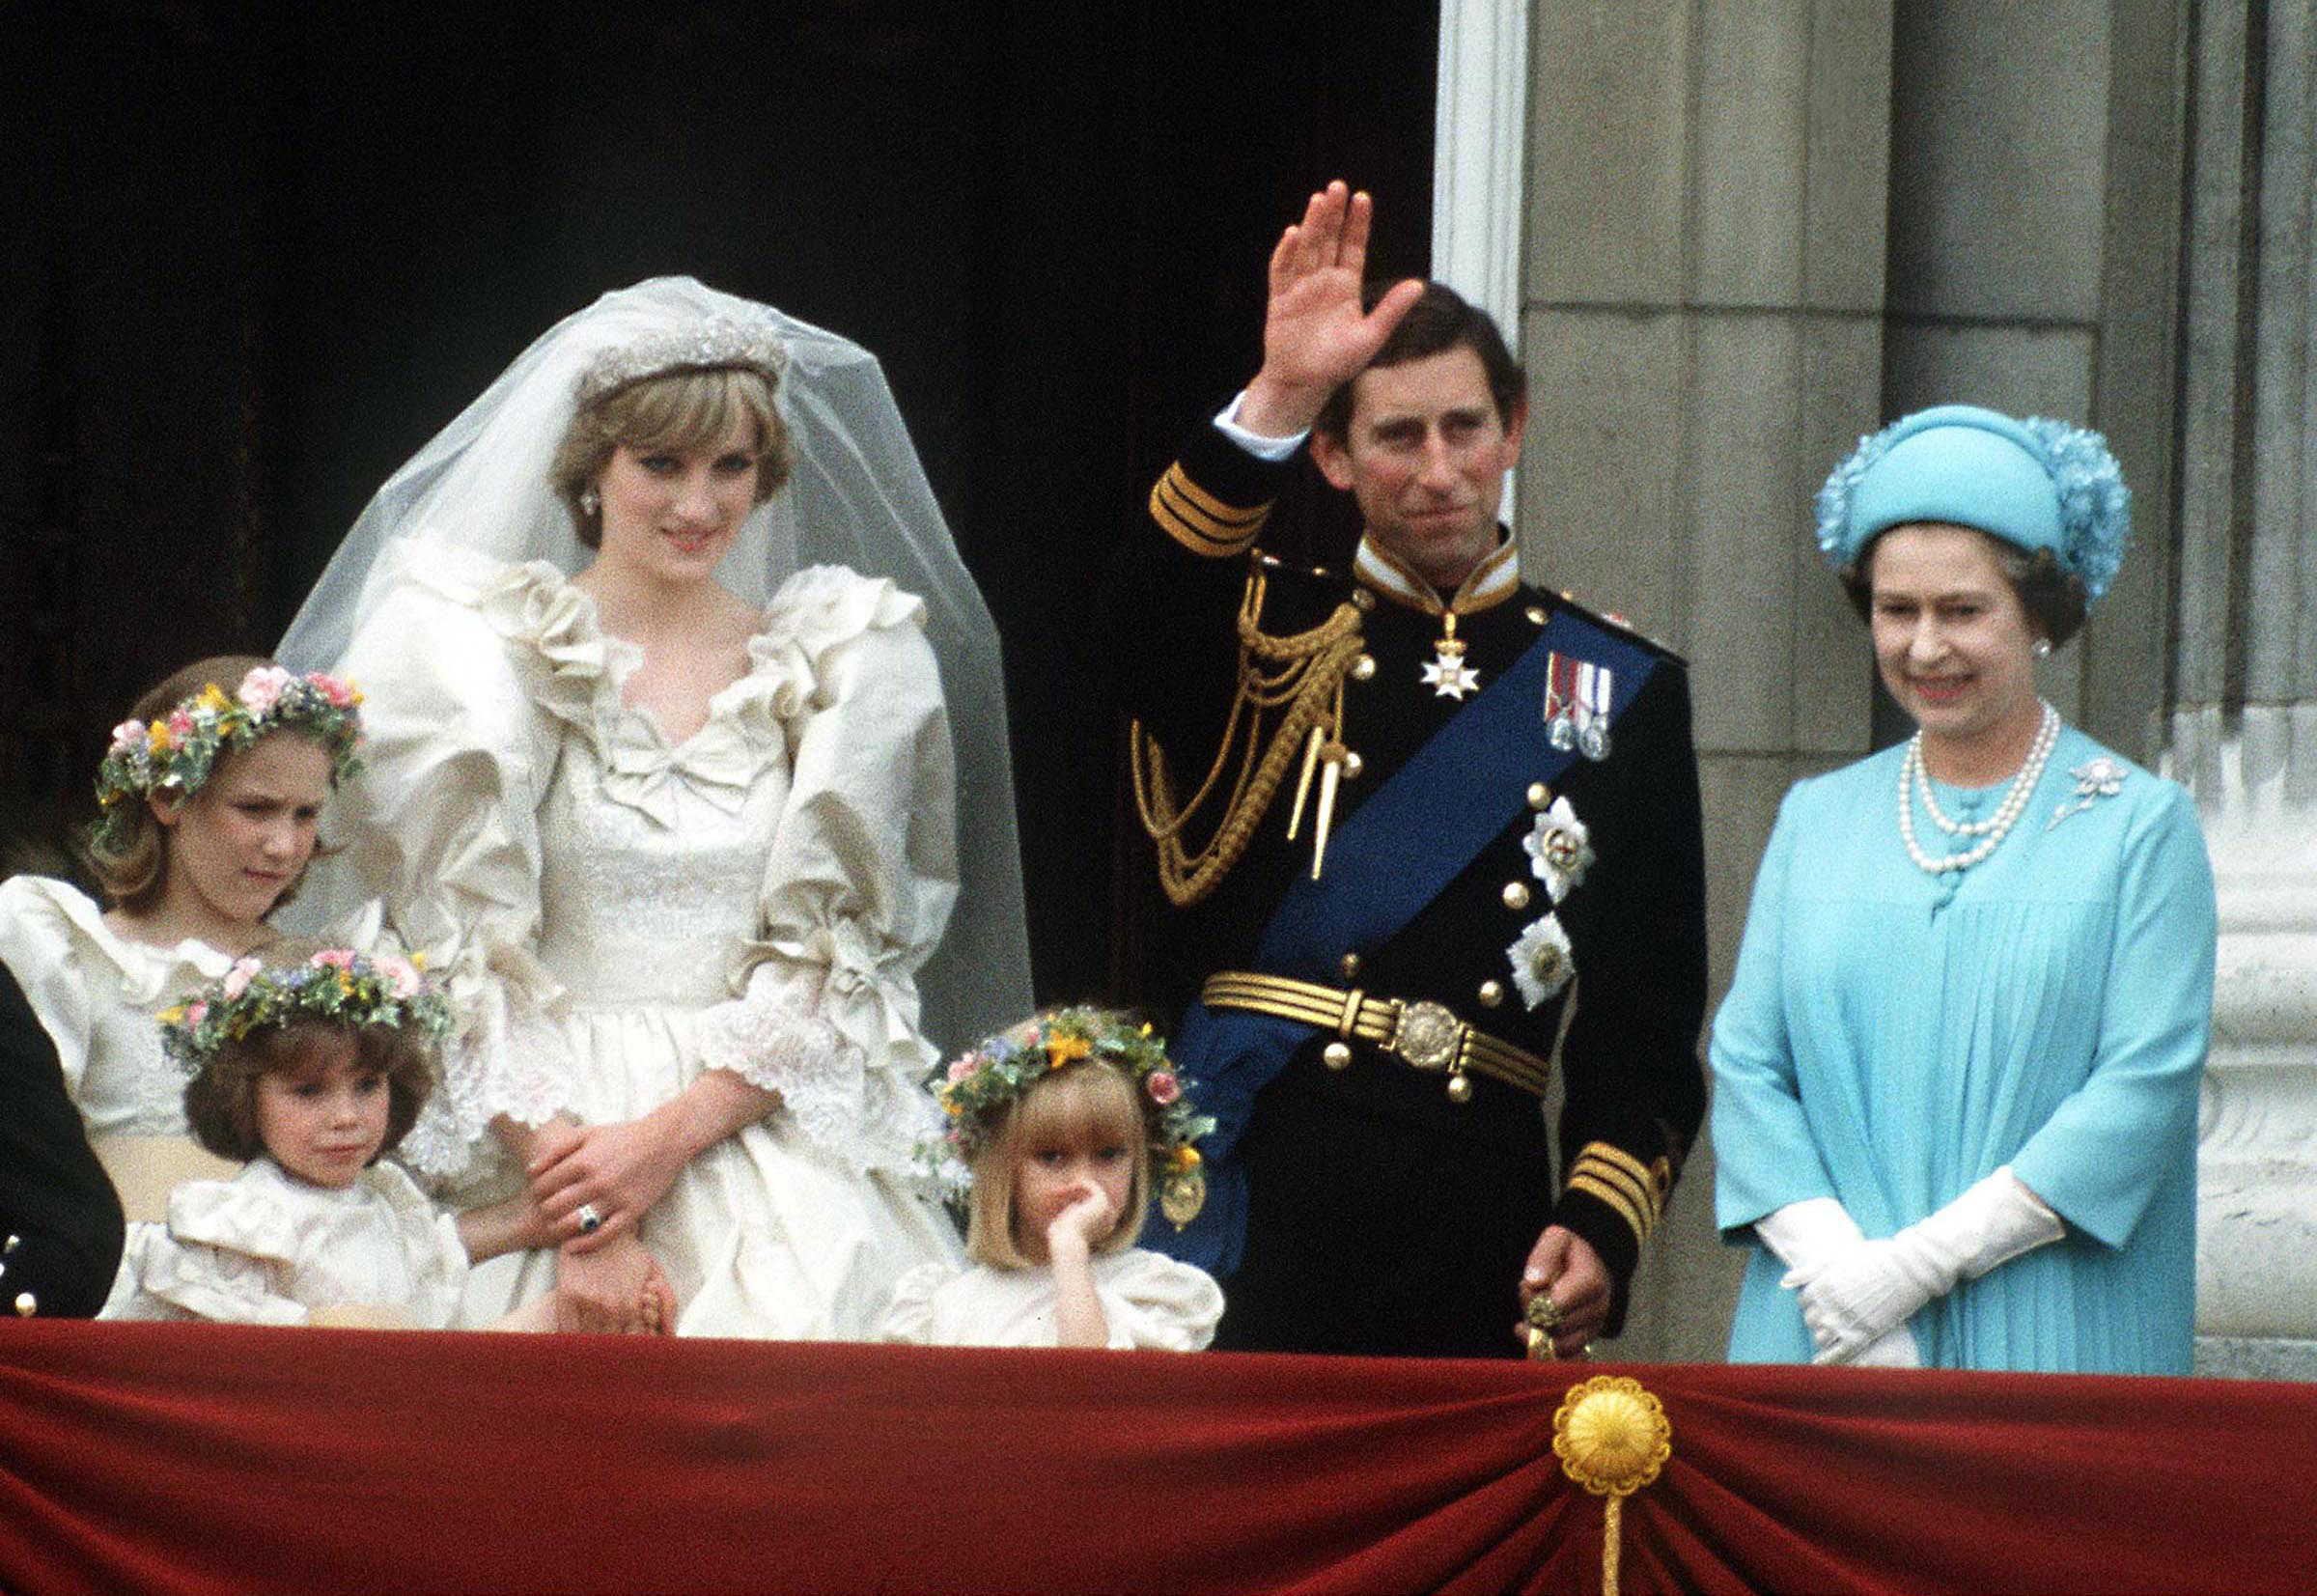 July 29, 1981. The Prince and Princess of Wales pose on the balcony of Buckingham Palace on their wedding day, with the Queen and some of the bridesmaids. July 1981.  